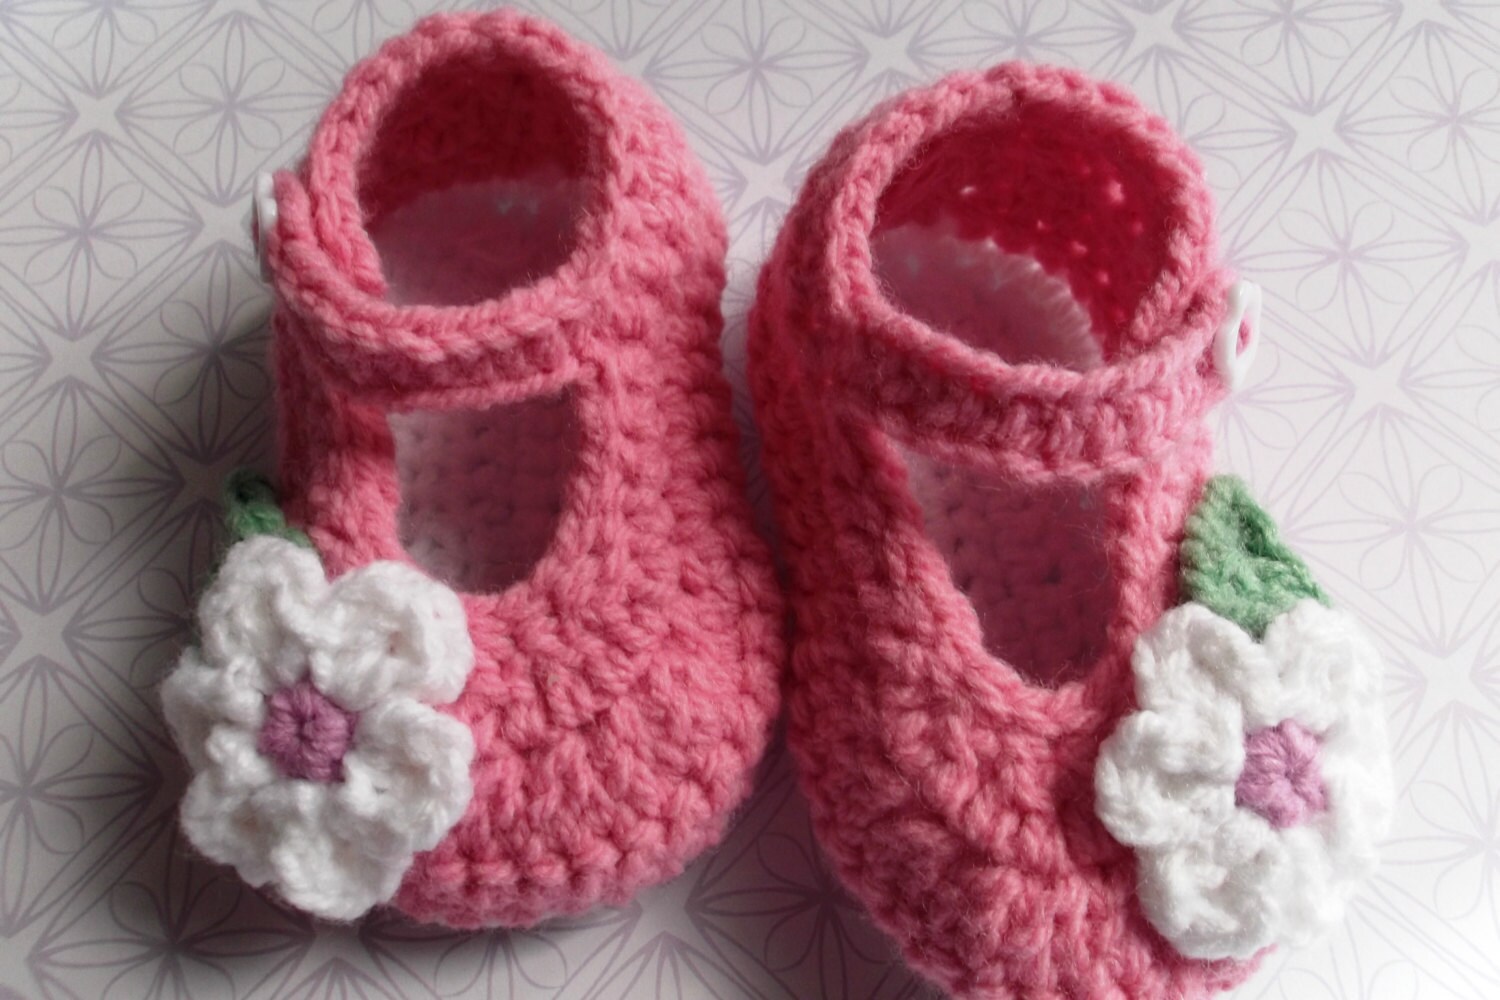 Crochet Baby Shoes Booties Crochet Doll Shoes Booties Pink Mary Jane 